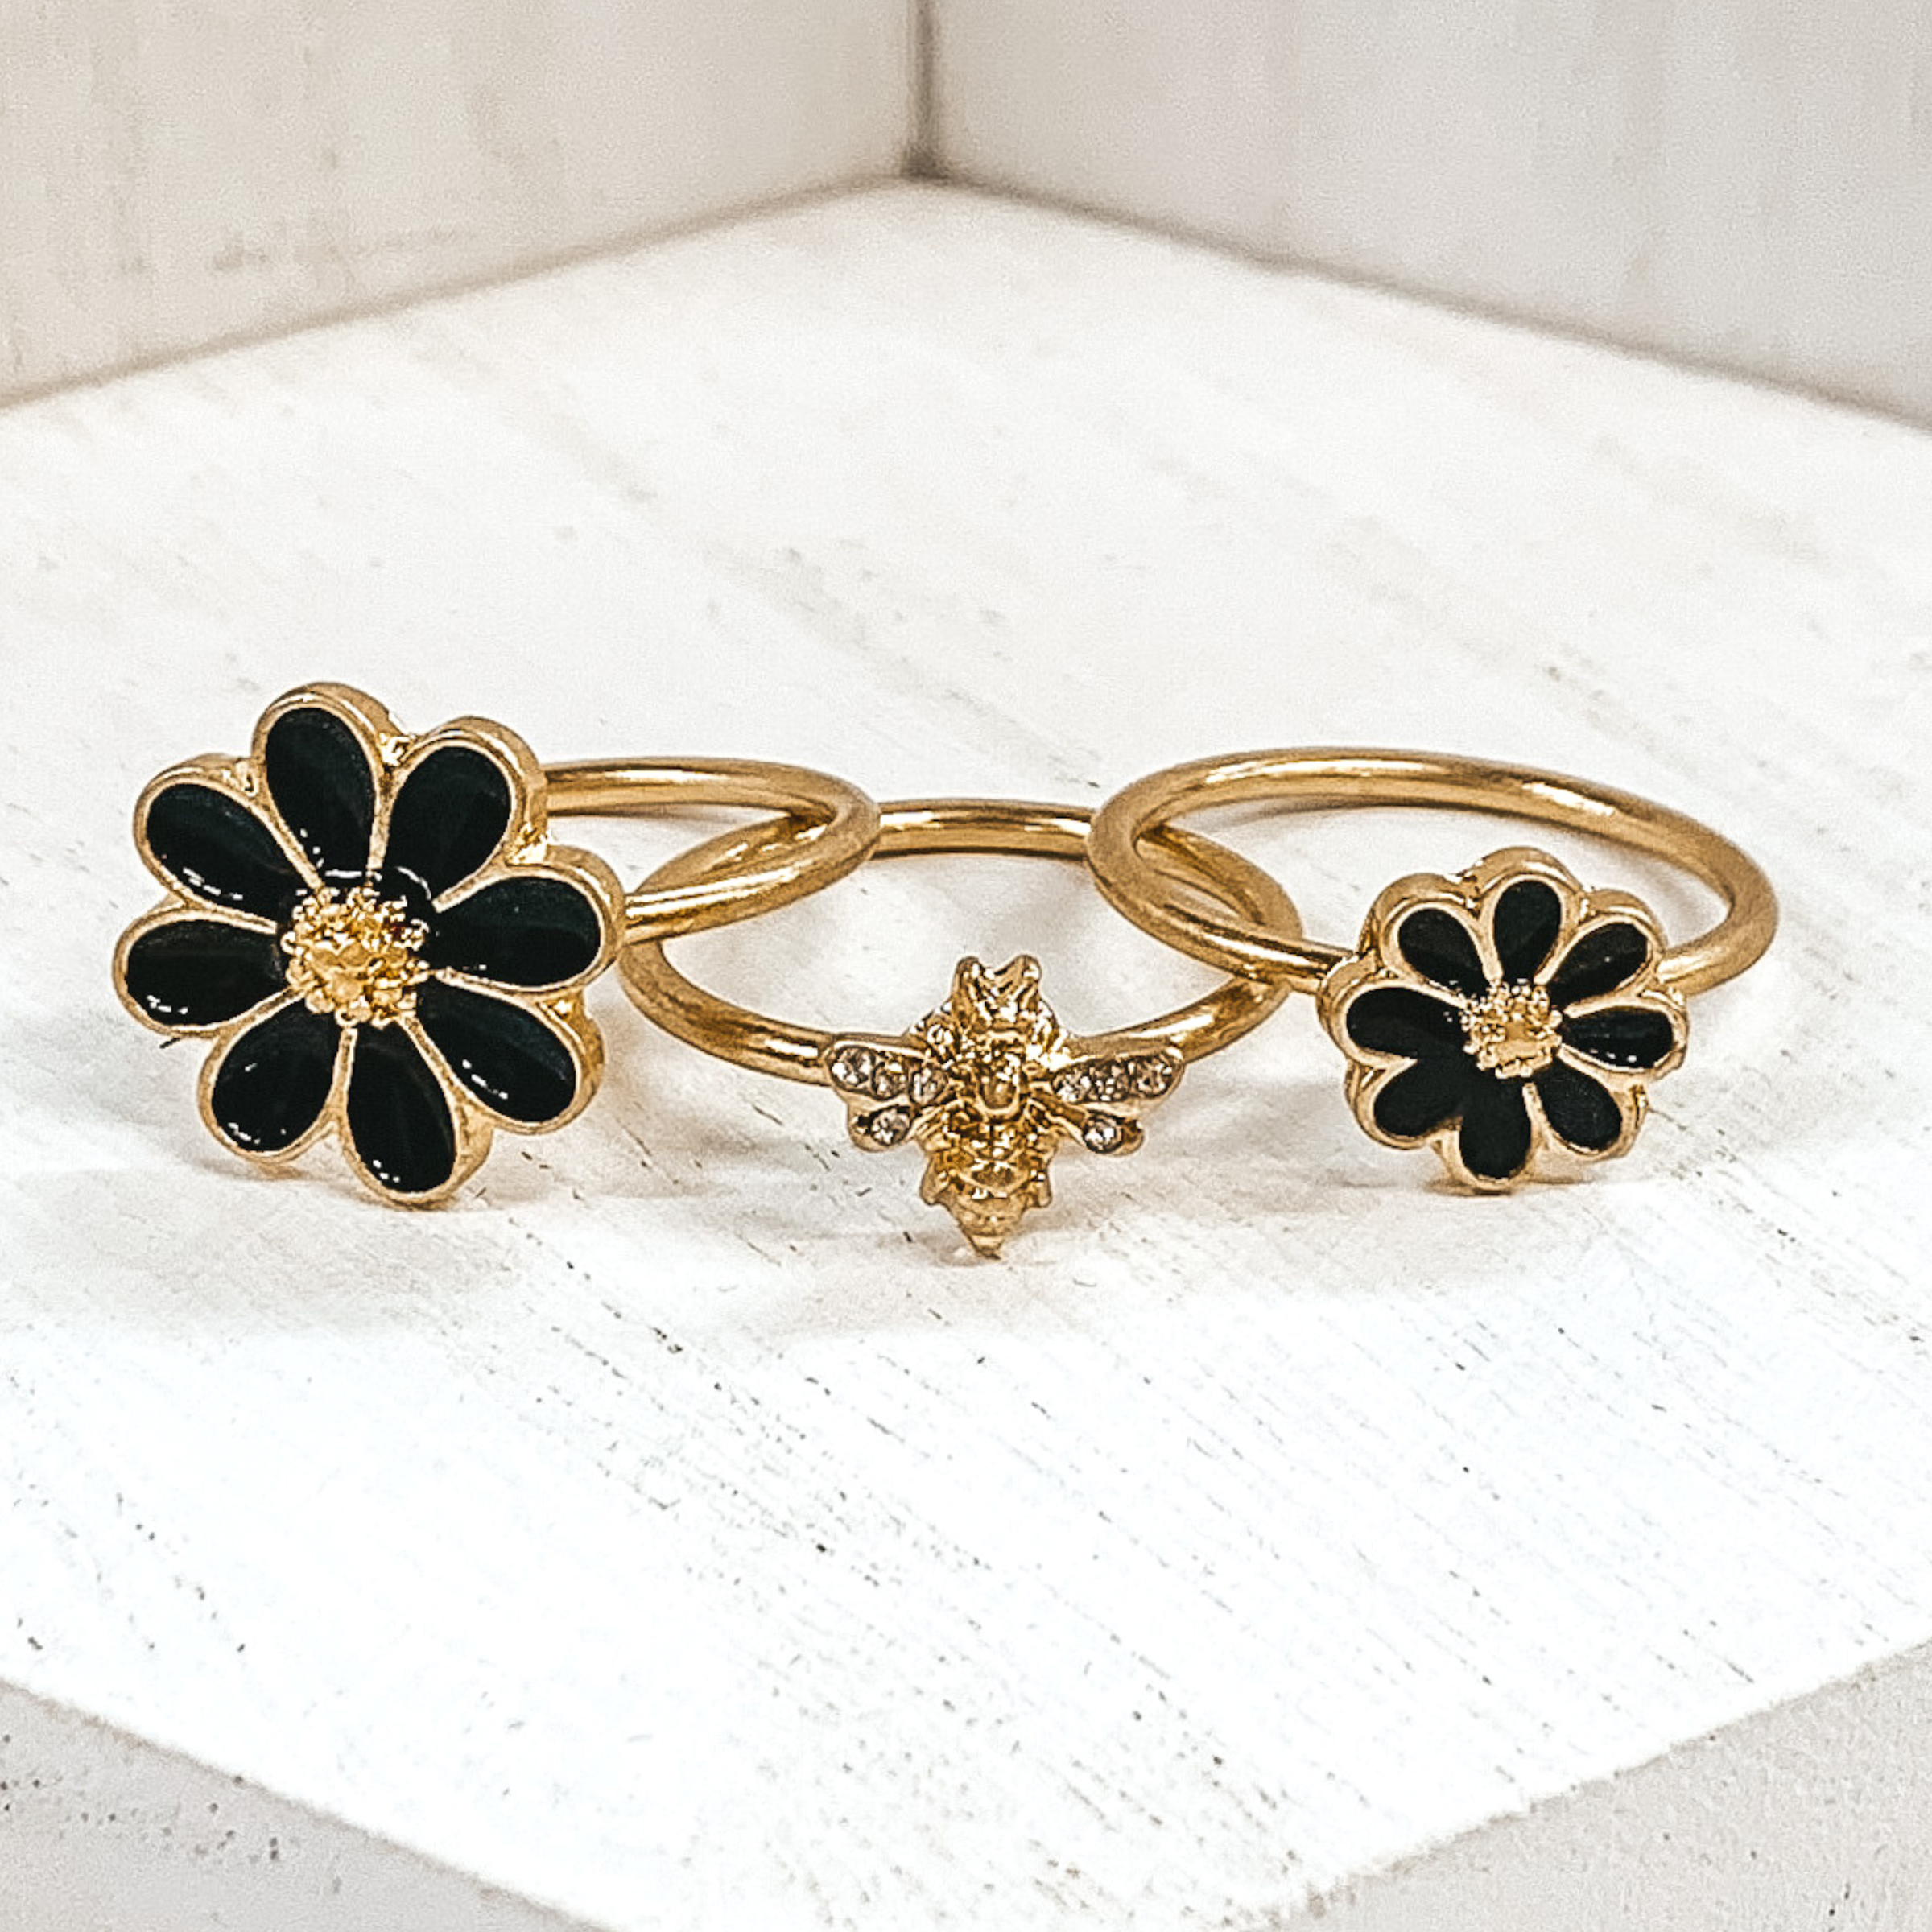 Set of three gold rings. Two rings have a black flower pendant that is outlined in gold. One flower is bigger than the other. The last ring has a gold bee pendant with clear crystals on the wings. These rings are pictured on a white background. 